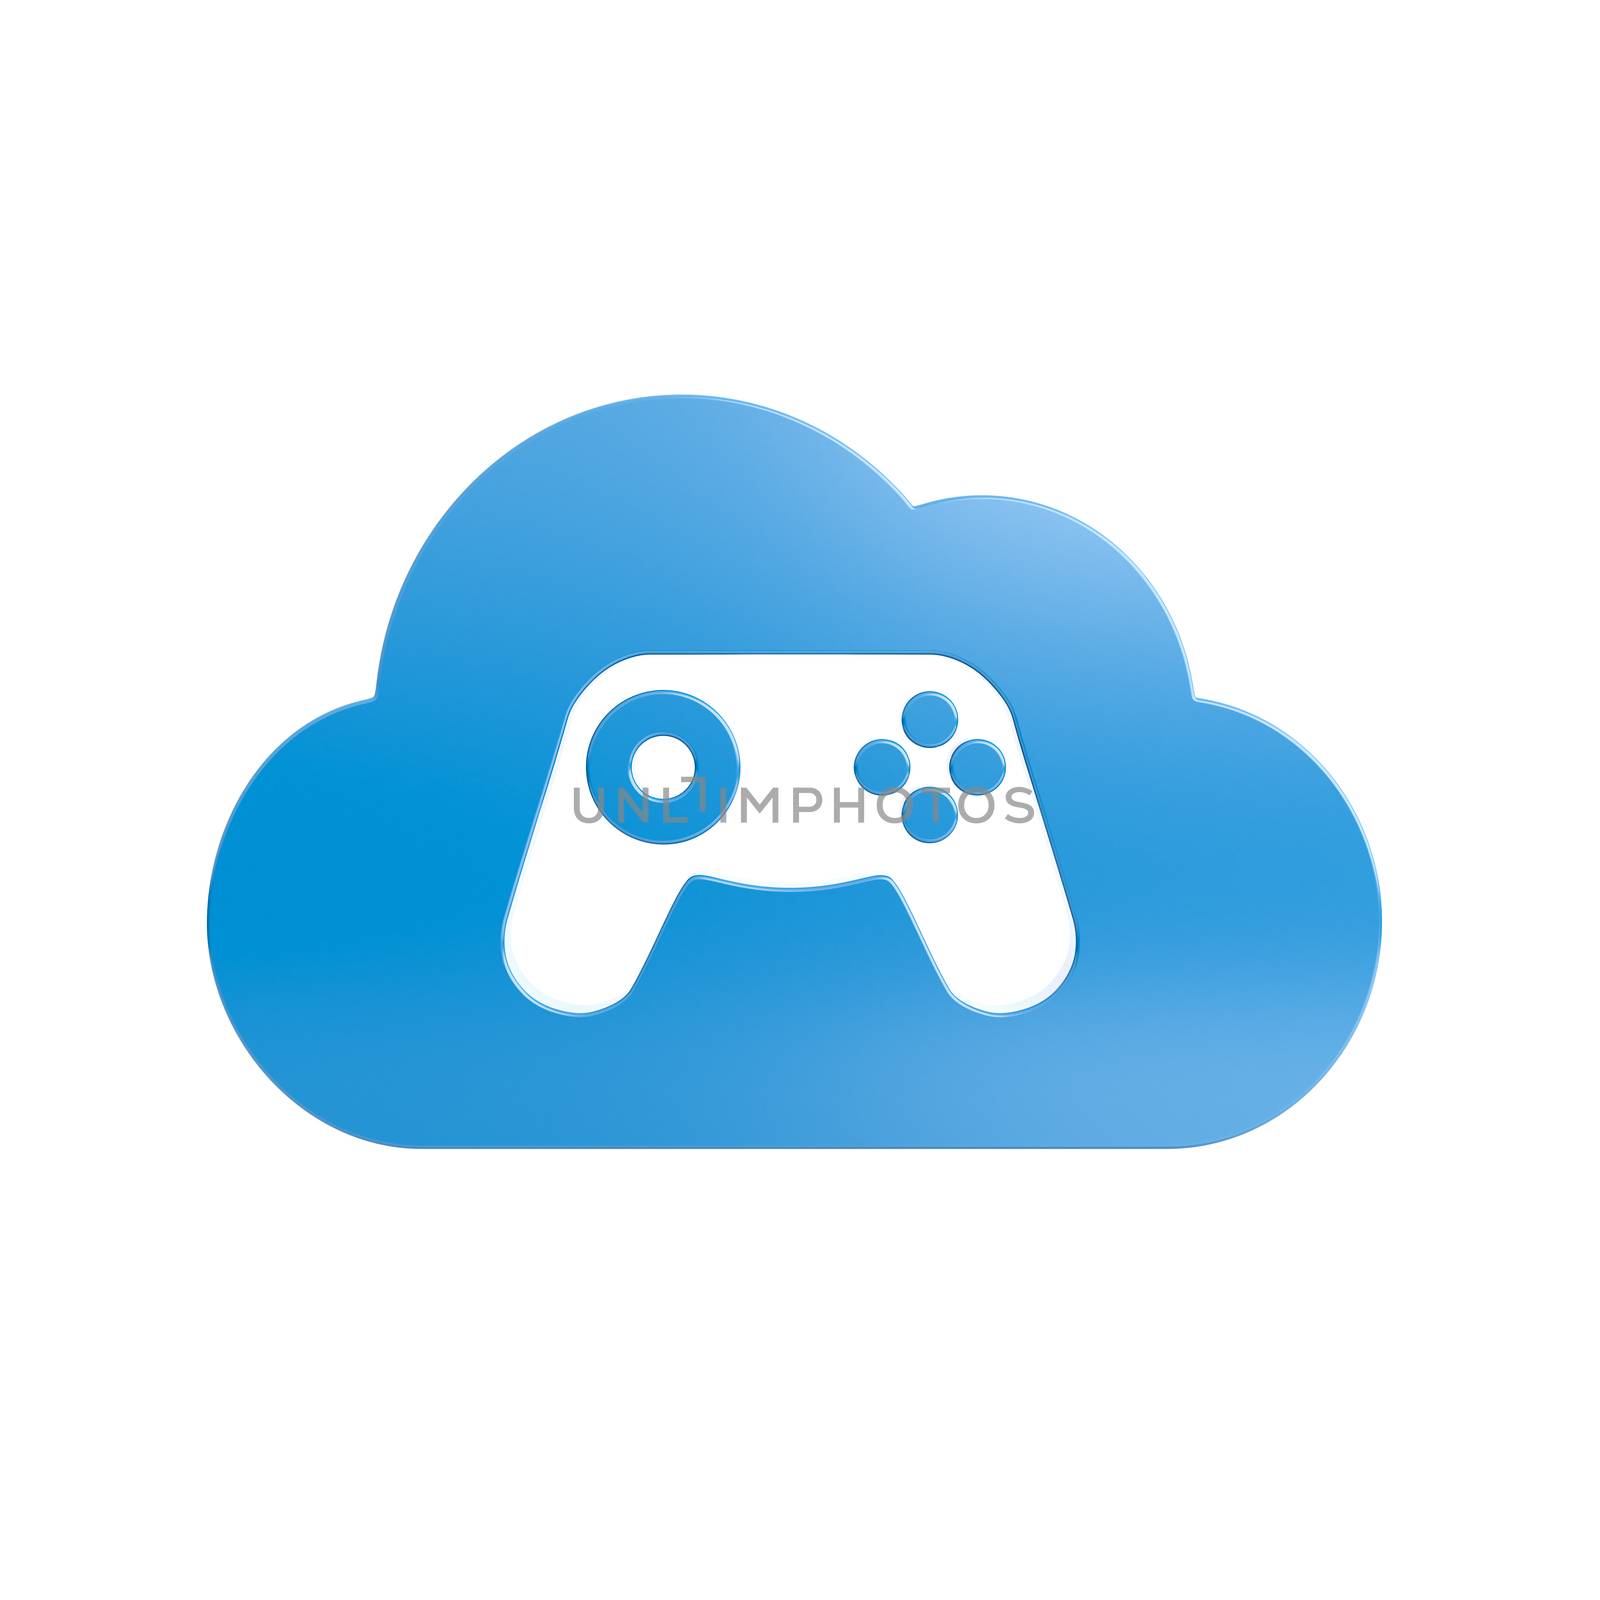 Blue 3D Cloud Symbol Shape with Gamepad Controller Inside Isolated on White Background 3D Illustration, Cloud Gaming Concept